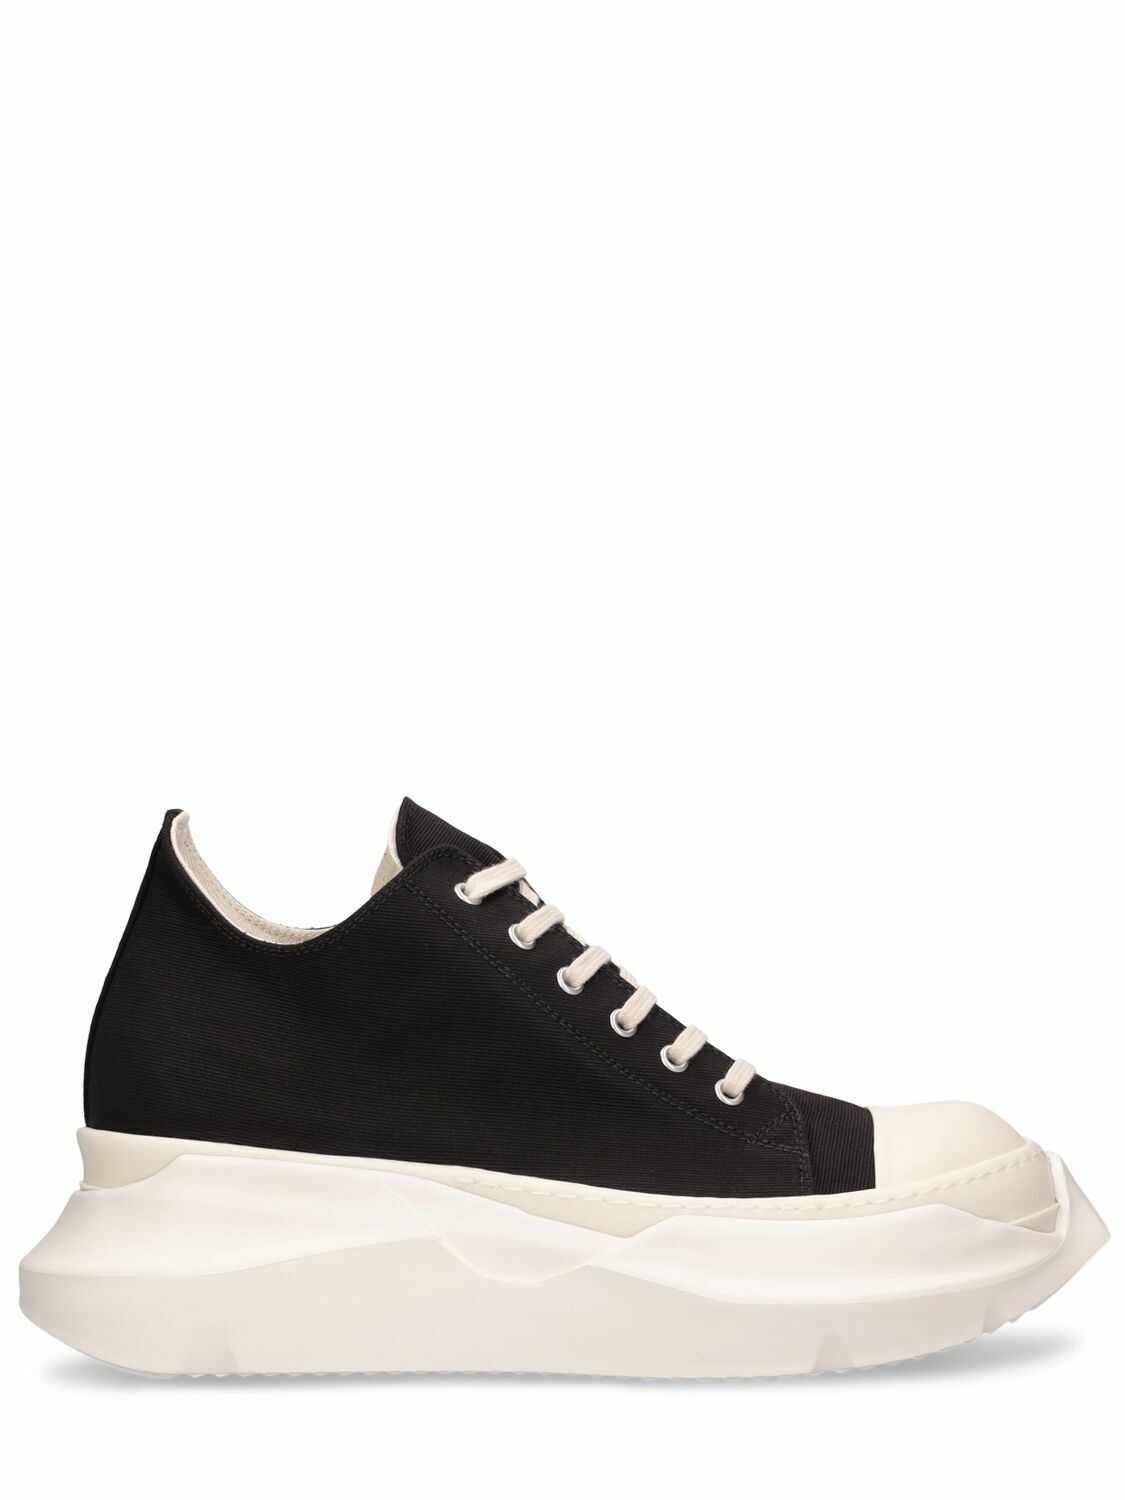 Photo: RICK OWENS DRKSHDW Abstract Top Sneakers